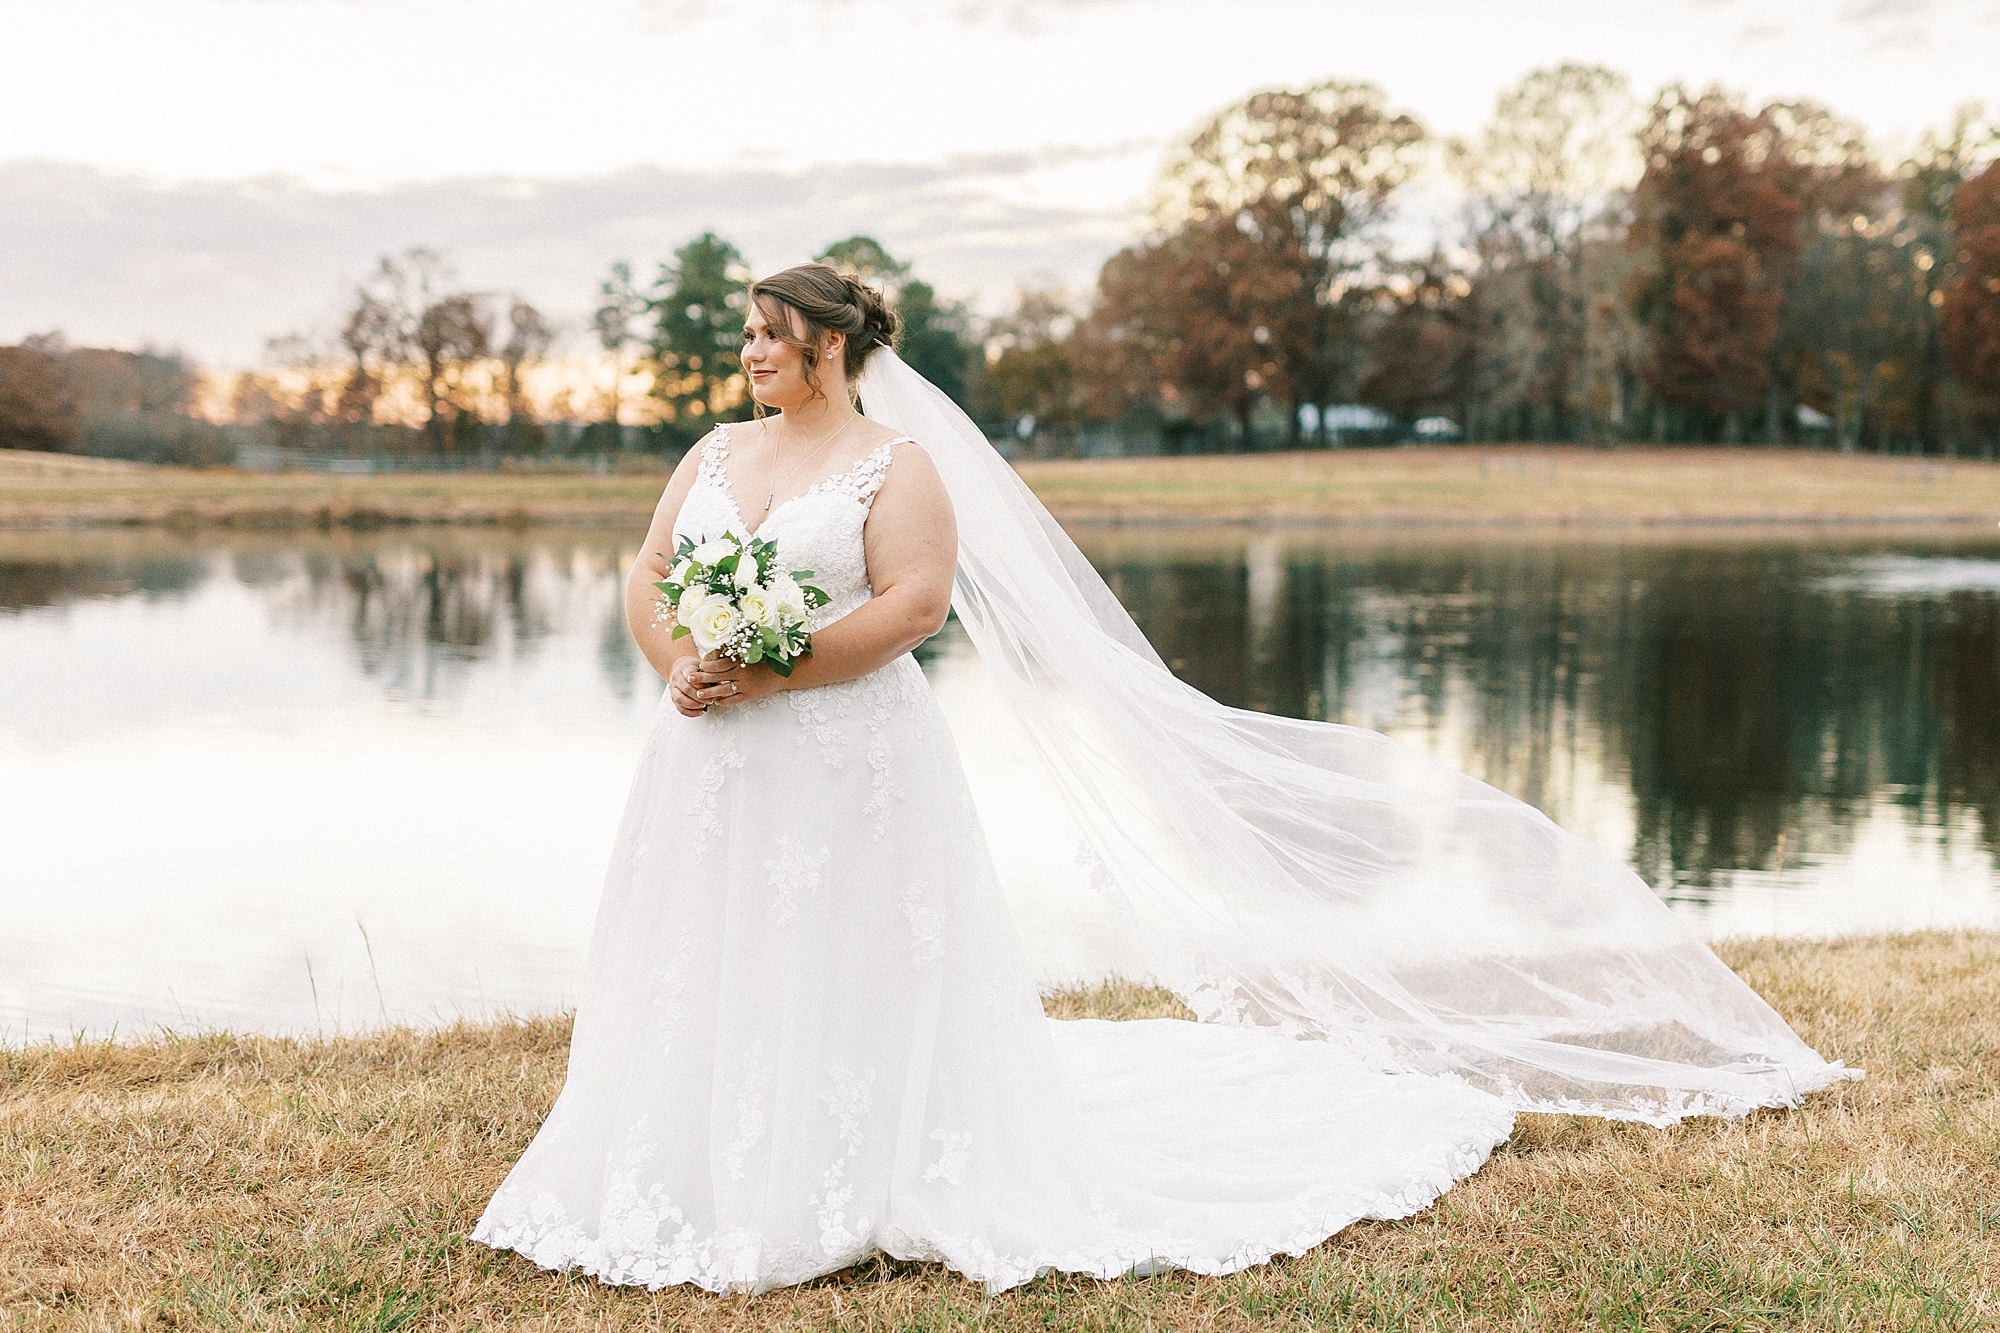 bride smiles looking over shoulder with veil trailing behind her near pond 